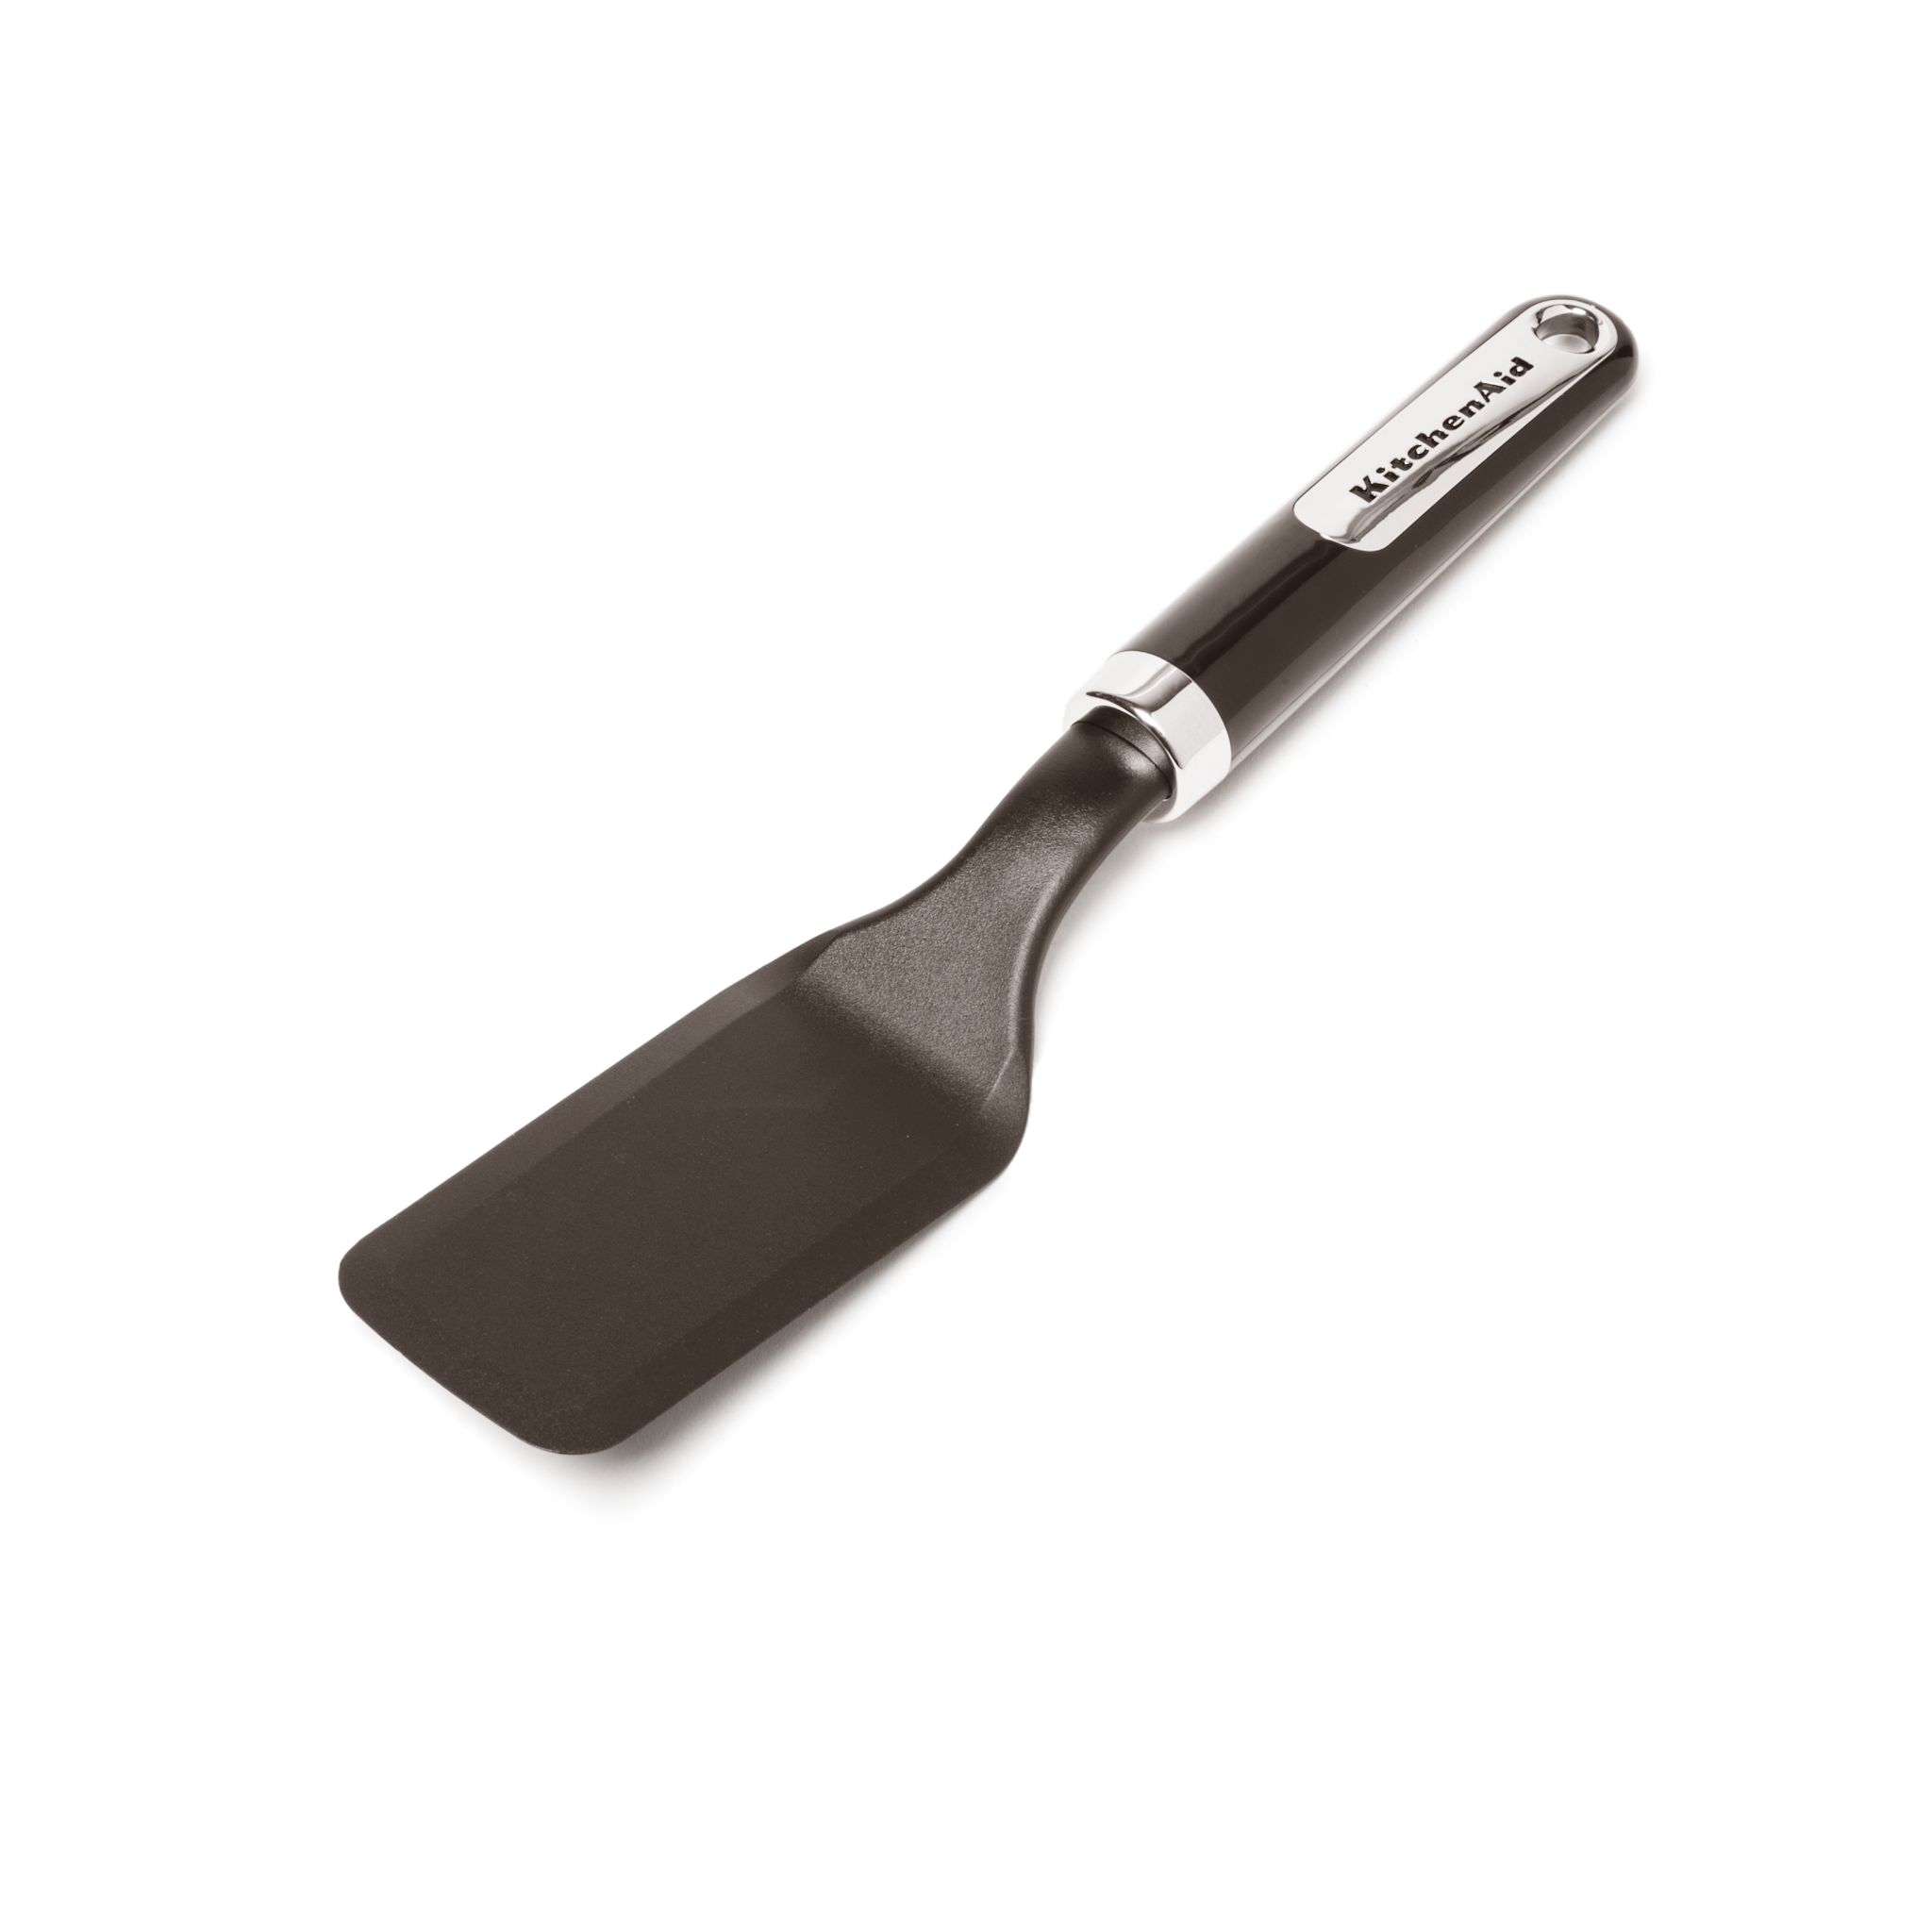 https://res.cloudinary.com/hksqkdlah/image/upload/37977_sil-compact-spatulas-kitchenaid-cookie-pastry-lifter.png